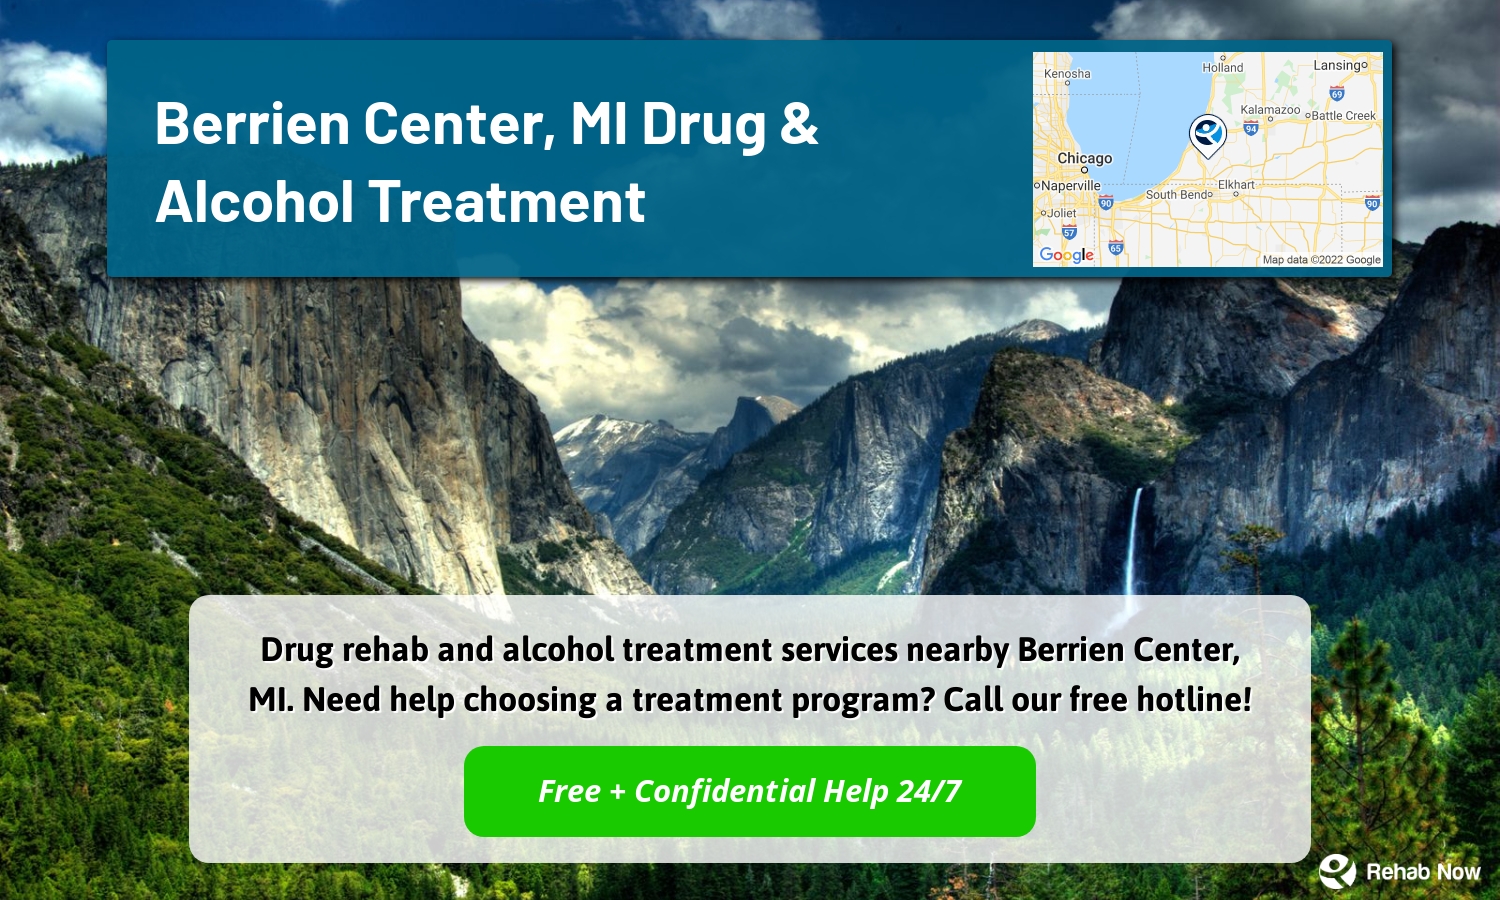 Drug rehab and alcohol treatment services nearby Berrien Center, MI. Need help choosing a treatment program? Call our free hotline!